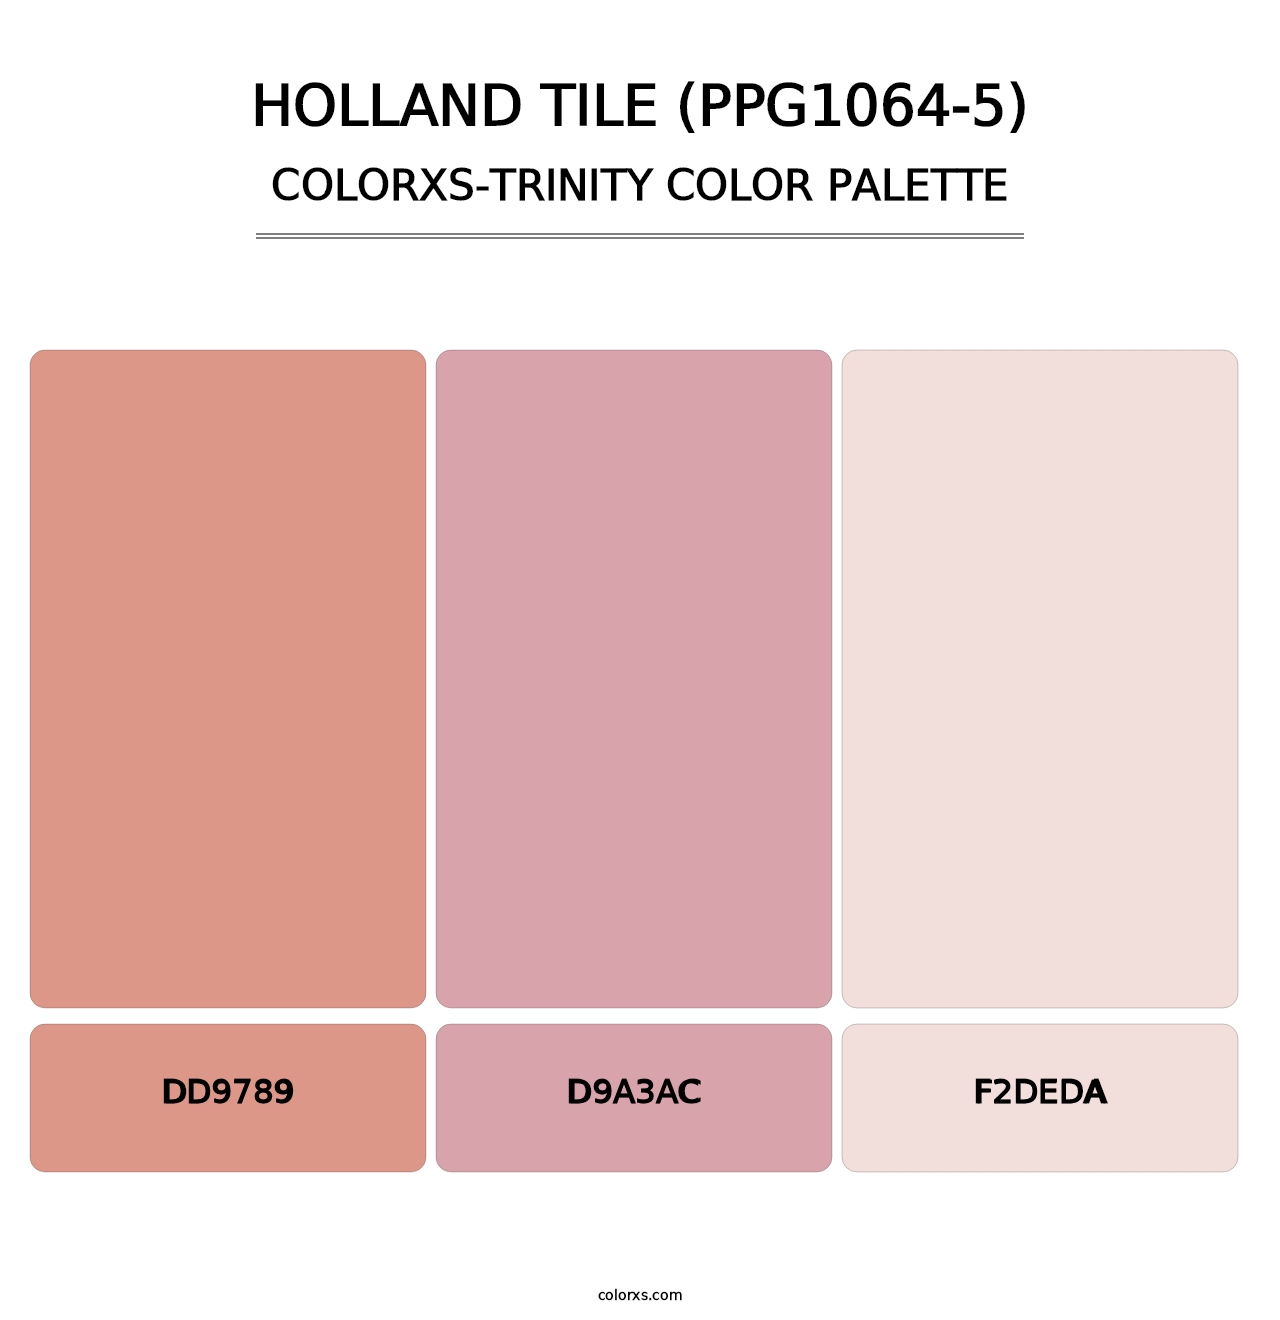 Holland Tile (PPG1064-5) - Colorxs Trinity Palette